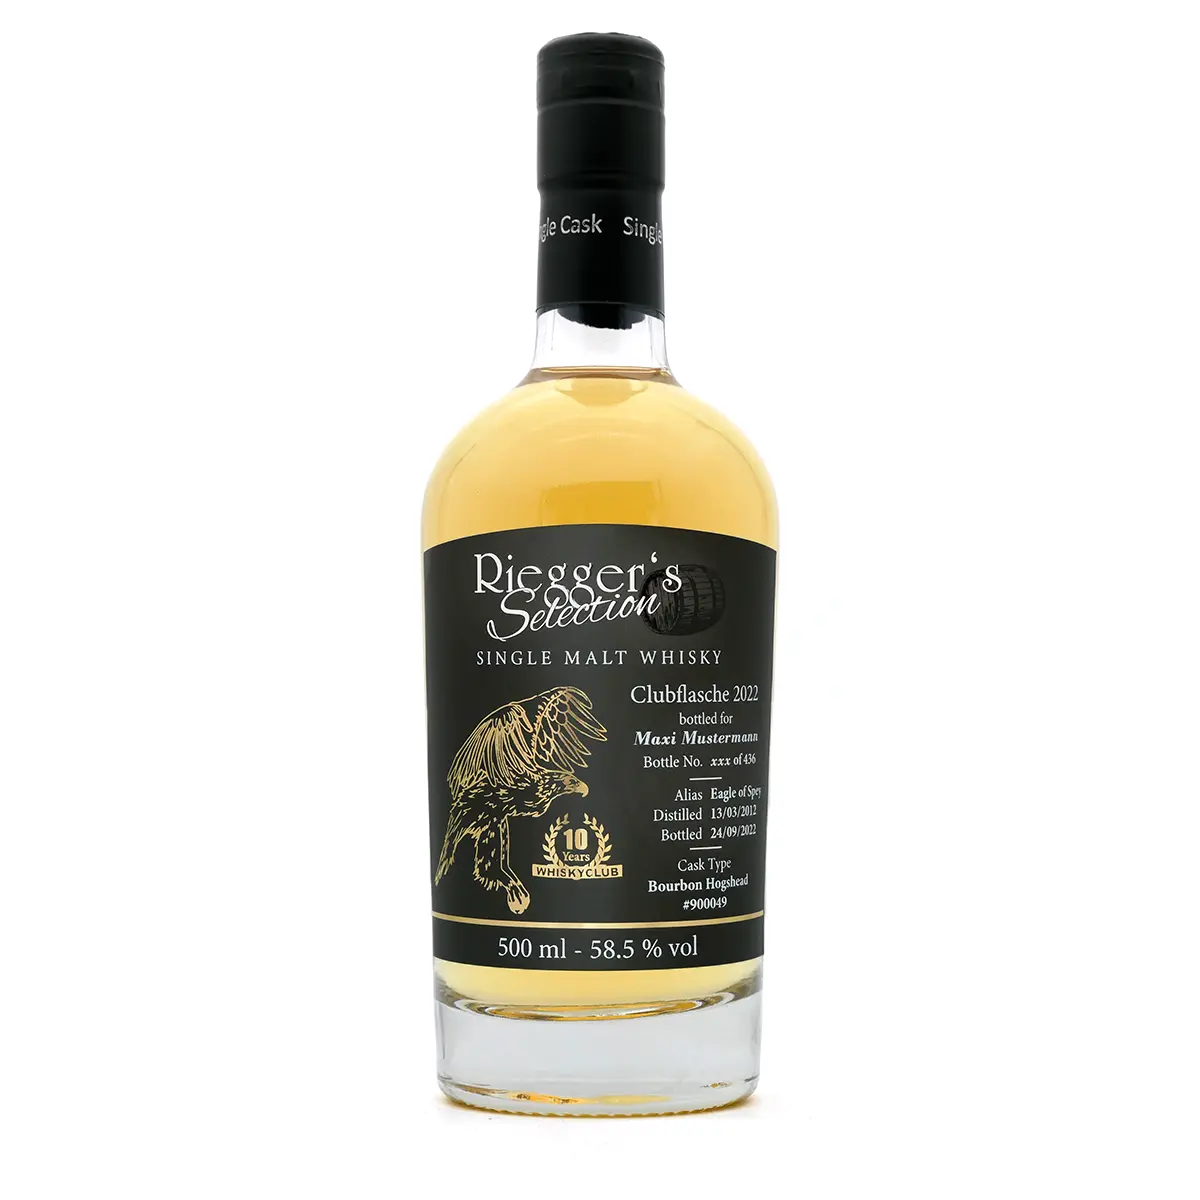 Whiskyclub-Flasche 2022: Eagle of Spey 2012 - Riegger's Selection (58,5 % vol)